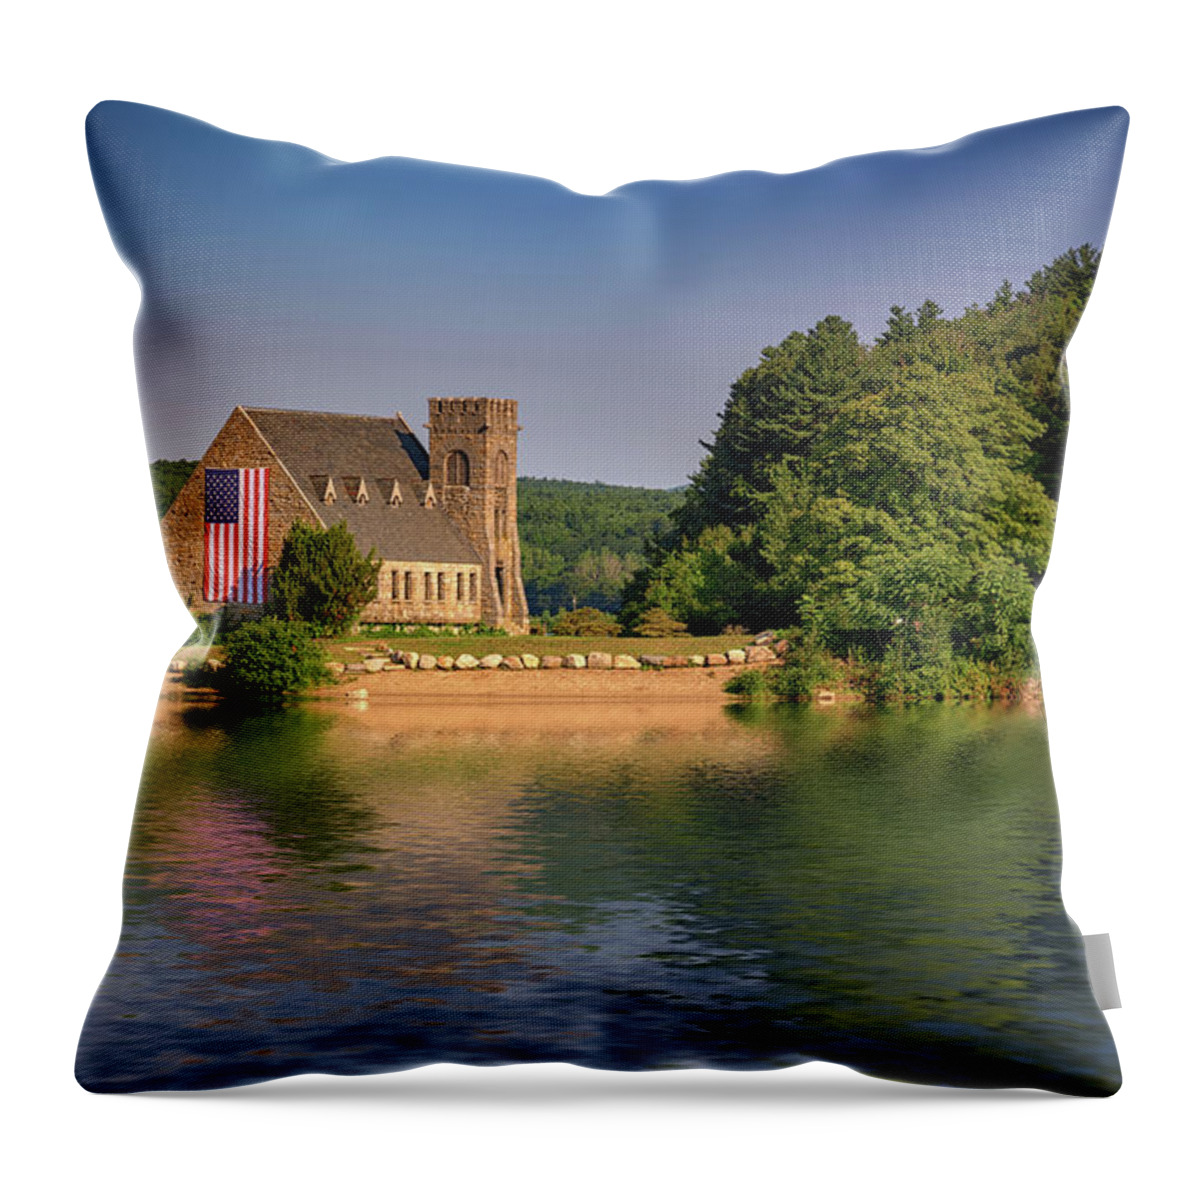 Church Throw Pillow featuring the photograph The Old Stone Church by Rick Berk